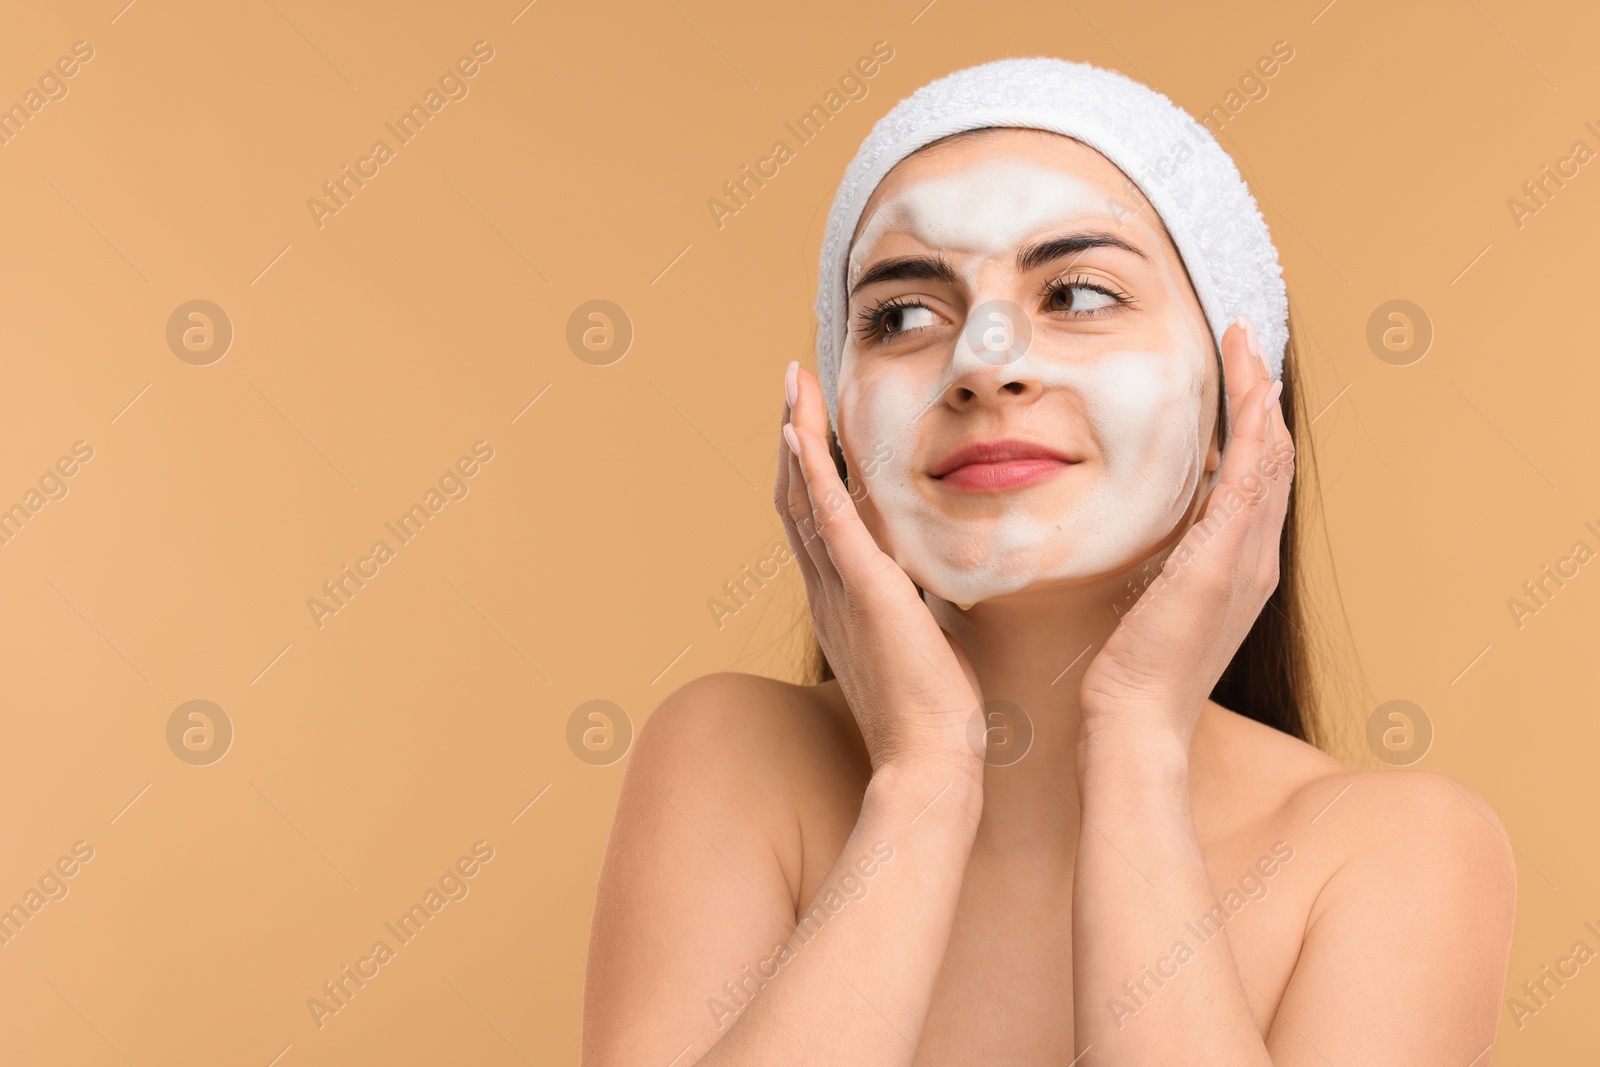 Photo of Young woman with headband washing her face on beige background, space for text